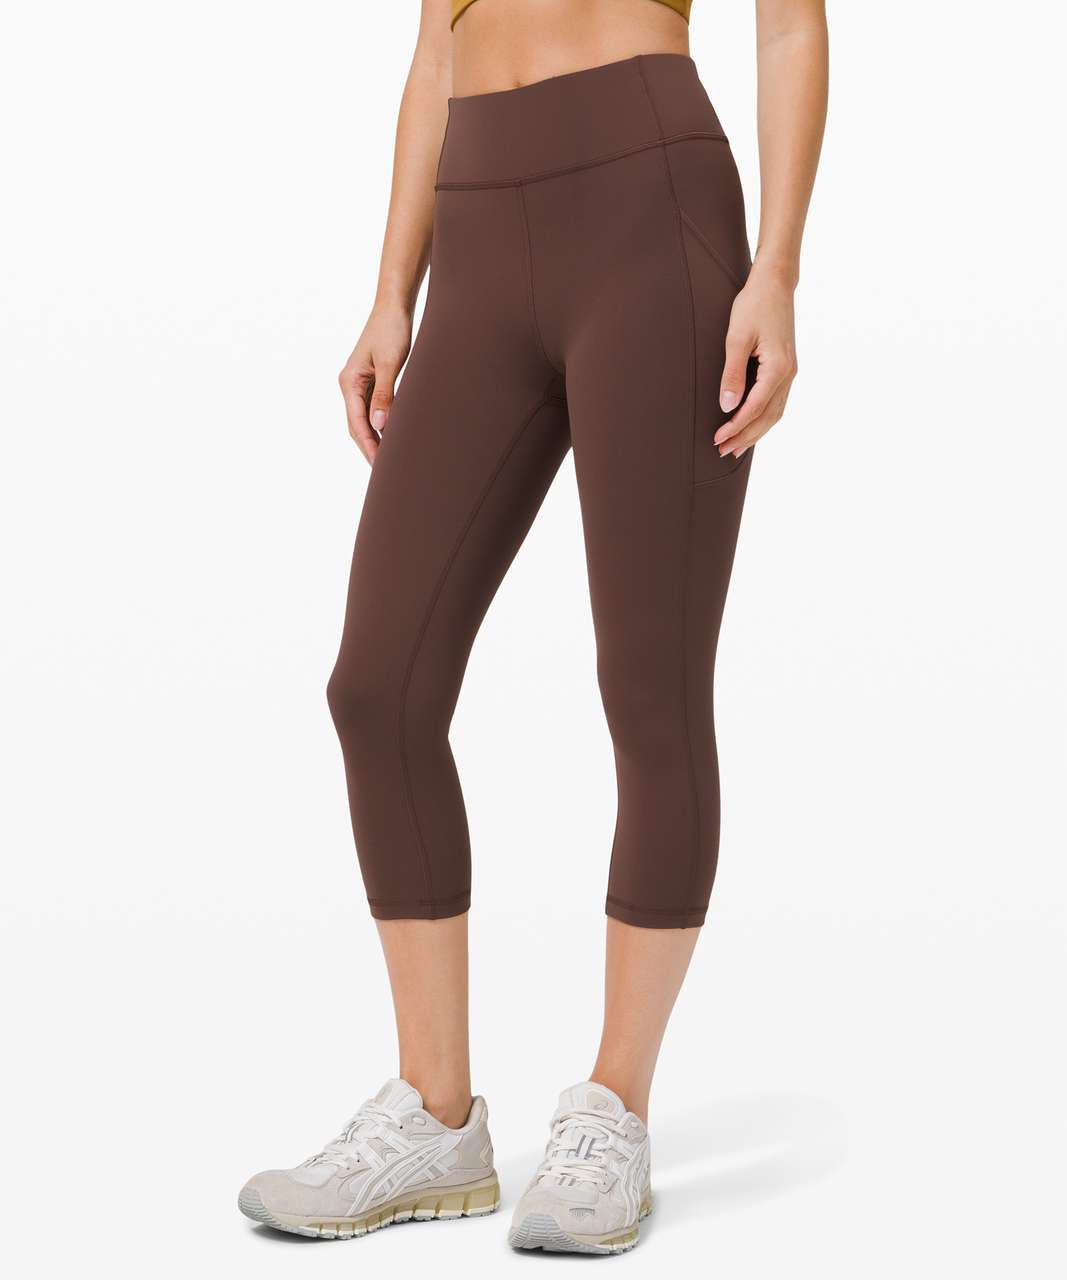 Brown Camo Lulu Leggings For Sale In Usa  International Society of  Precision Agriculture